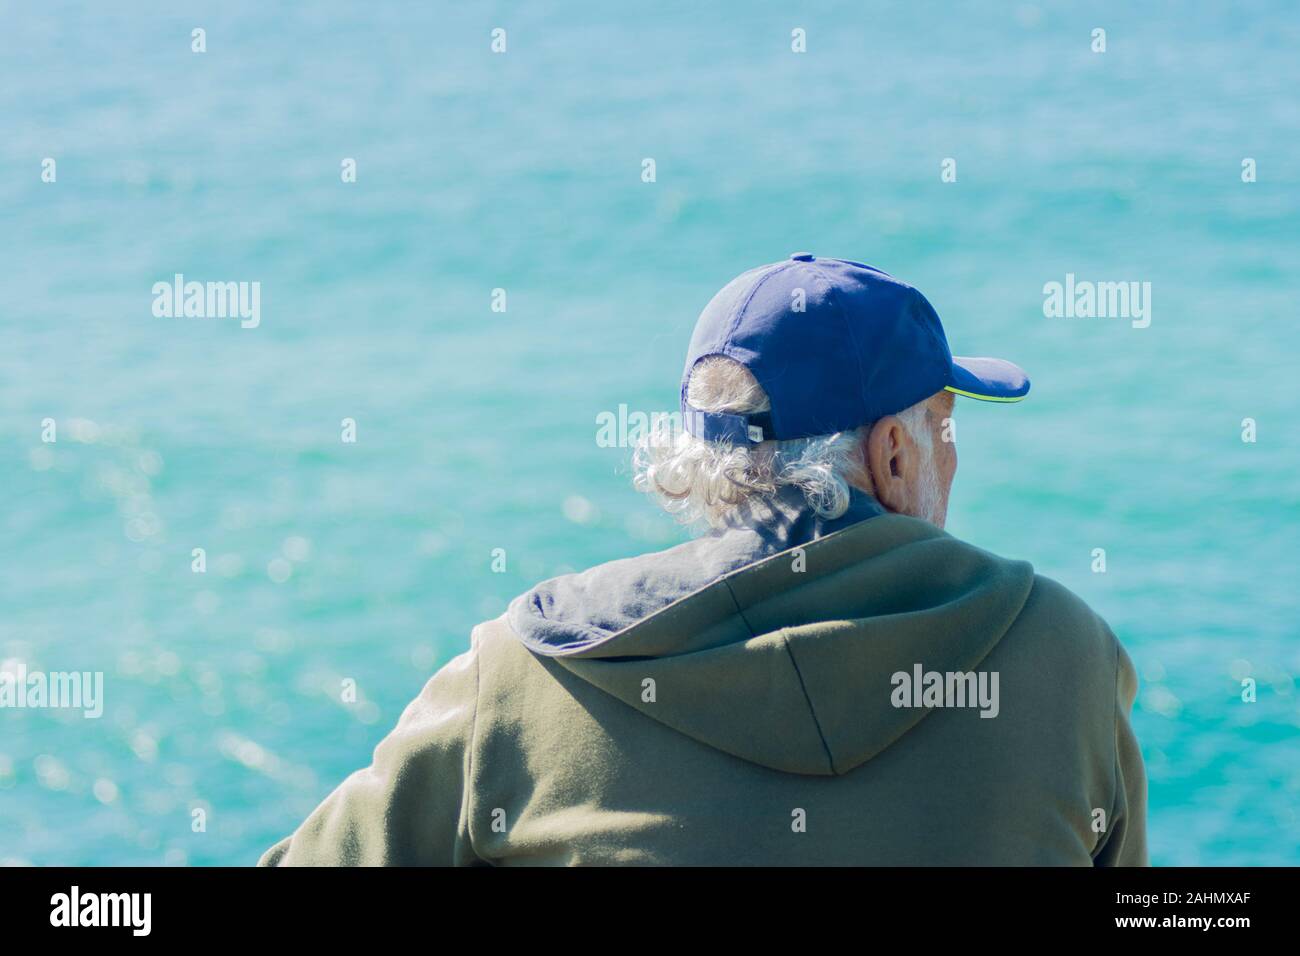 Back view of gentleman wearing sweatshirt and cap looking out at the blue ocean. concept of reflection and good vibes. Stock Photo